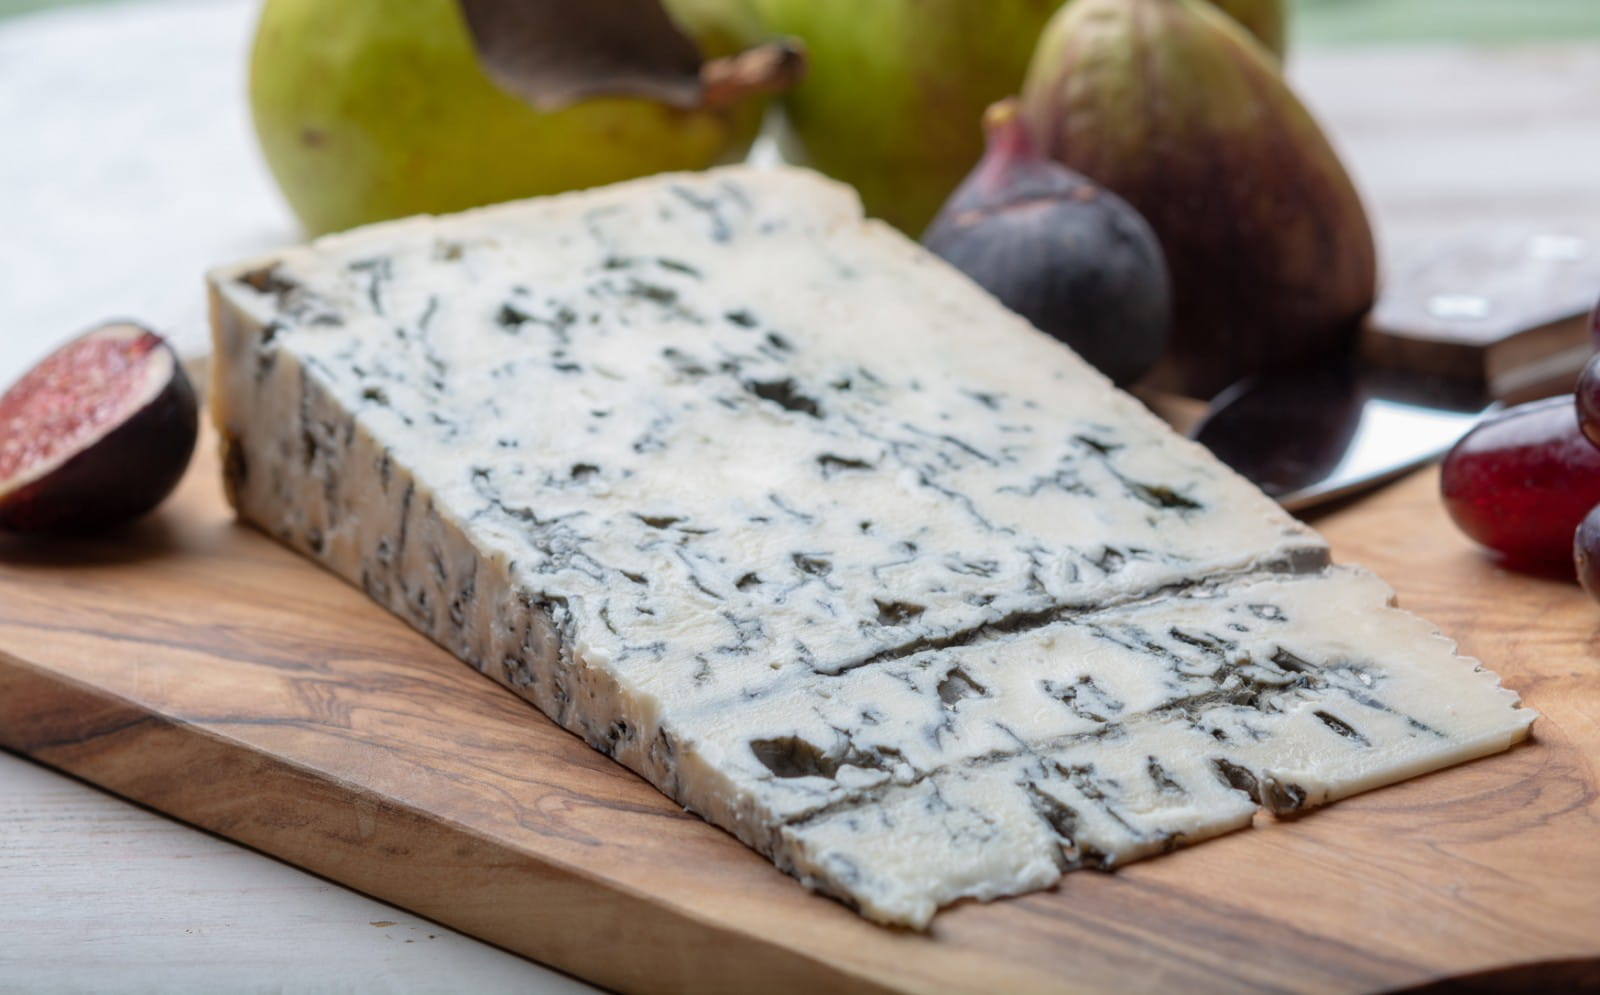 What type of wine goes with blue cheese?